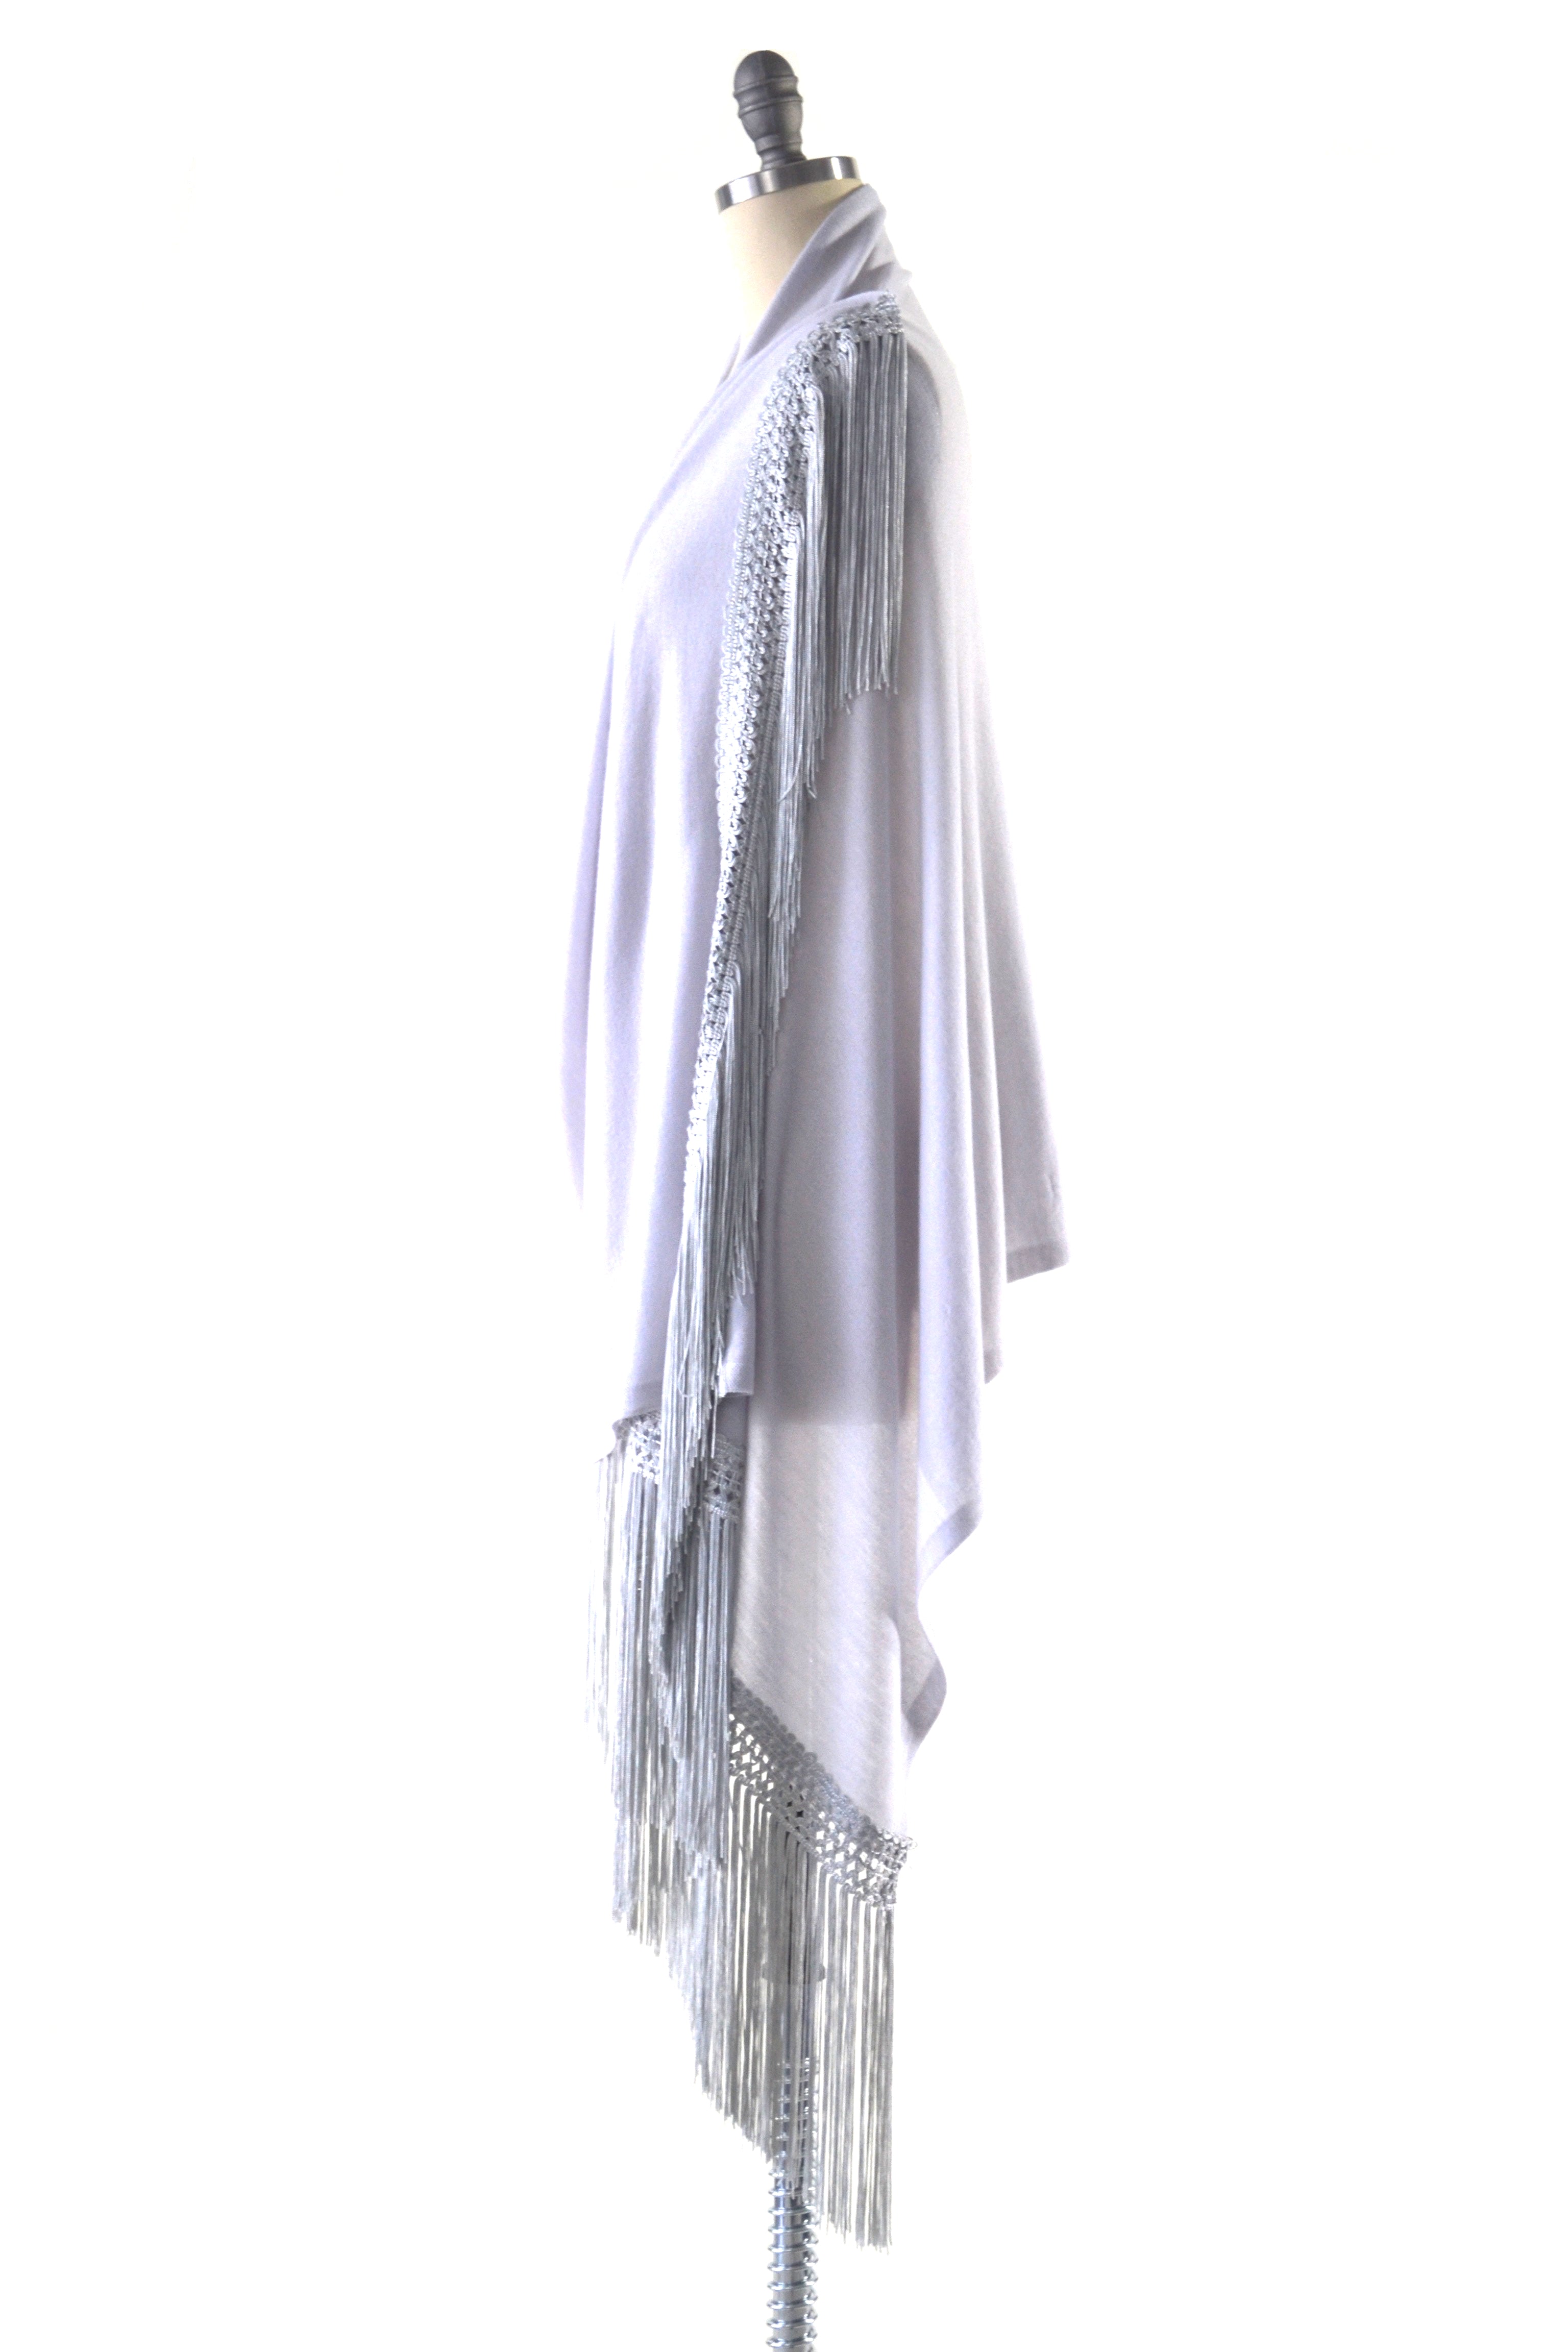 Fine Cashmere Wrap with Double Silky Macrame Fringe in Silver Gray